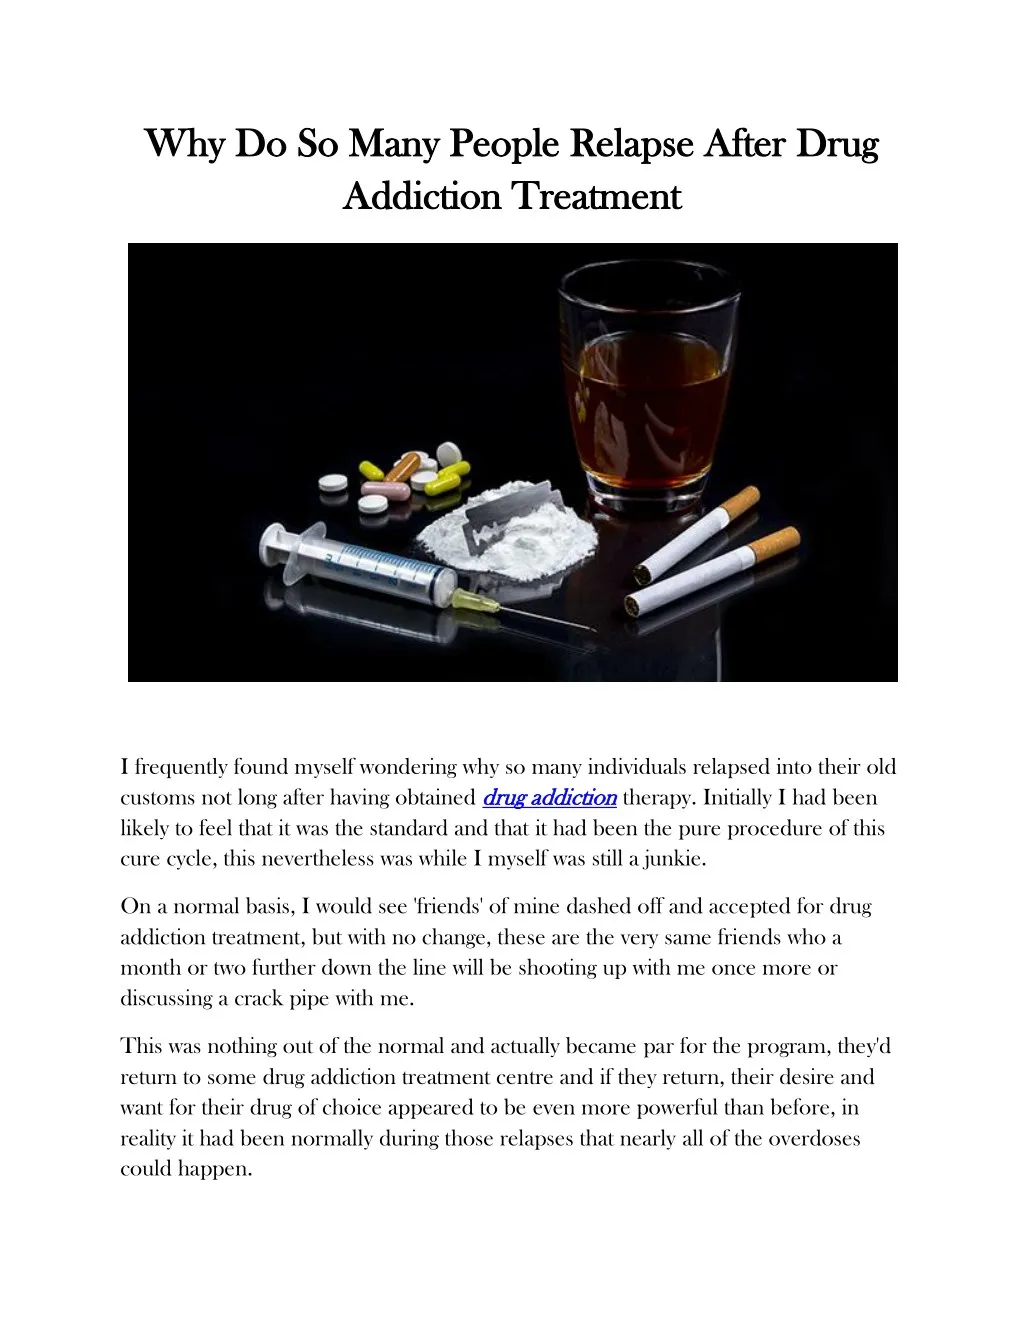 why do so many people relapse after drug